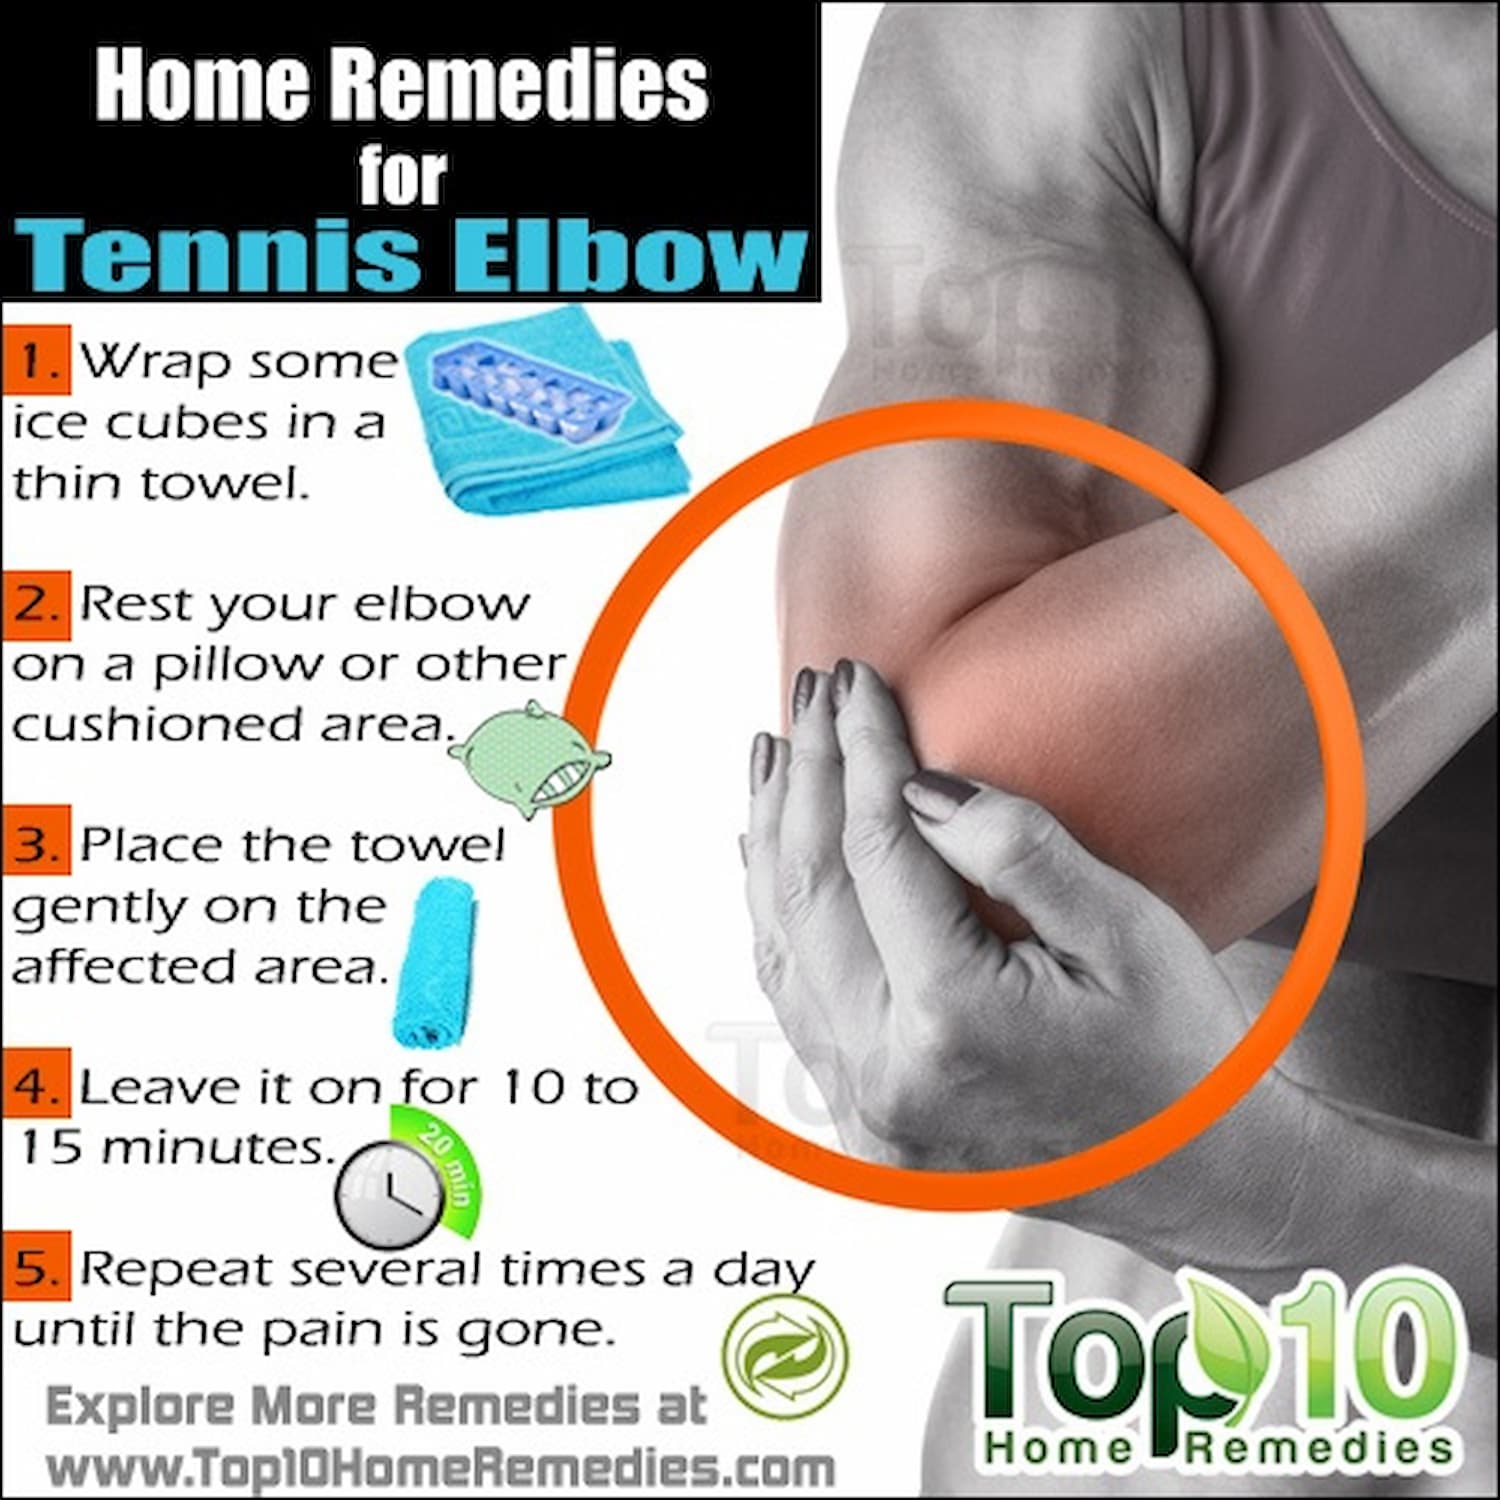 Tennis elbow natural treatments that work